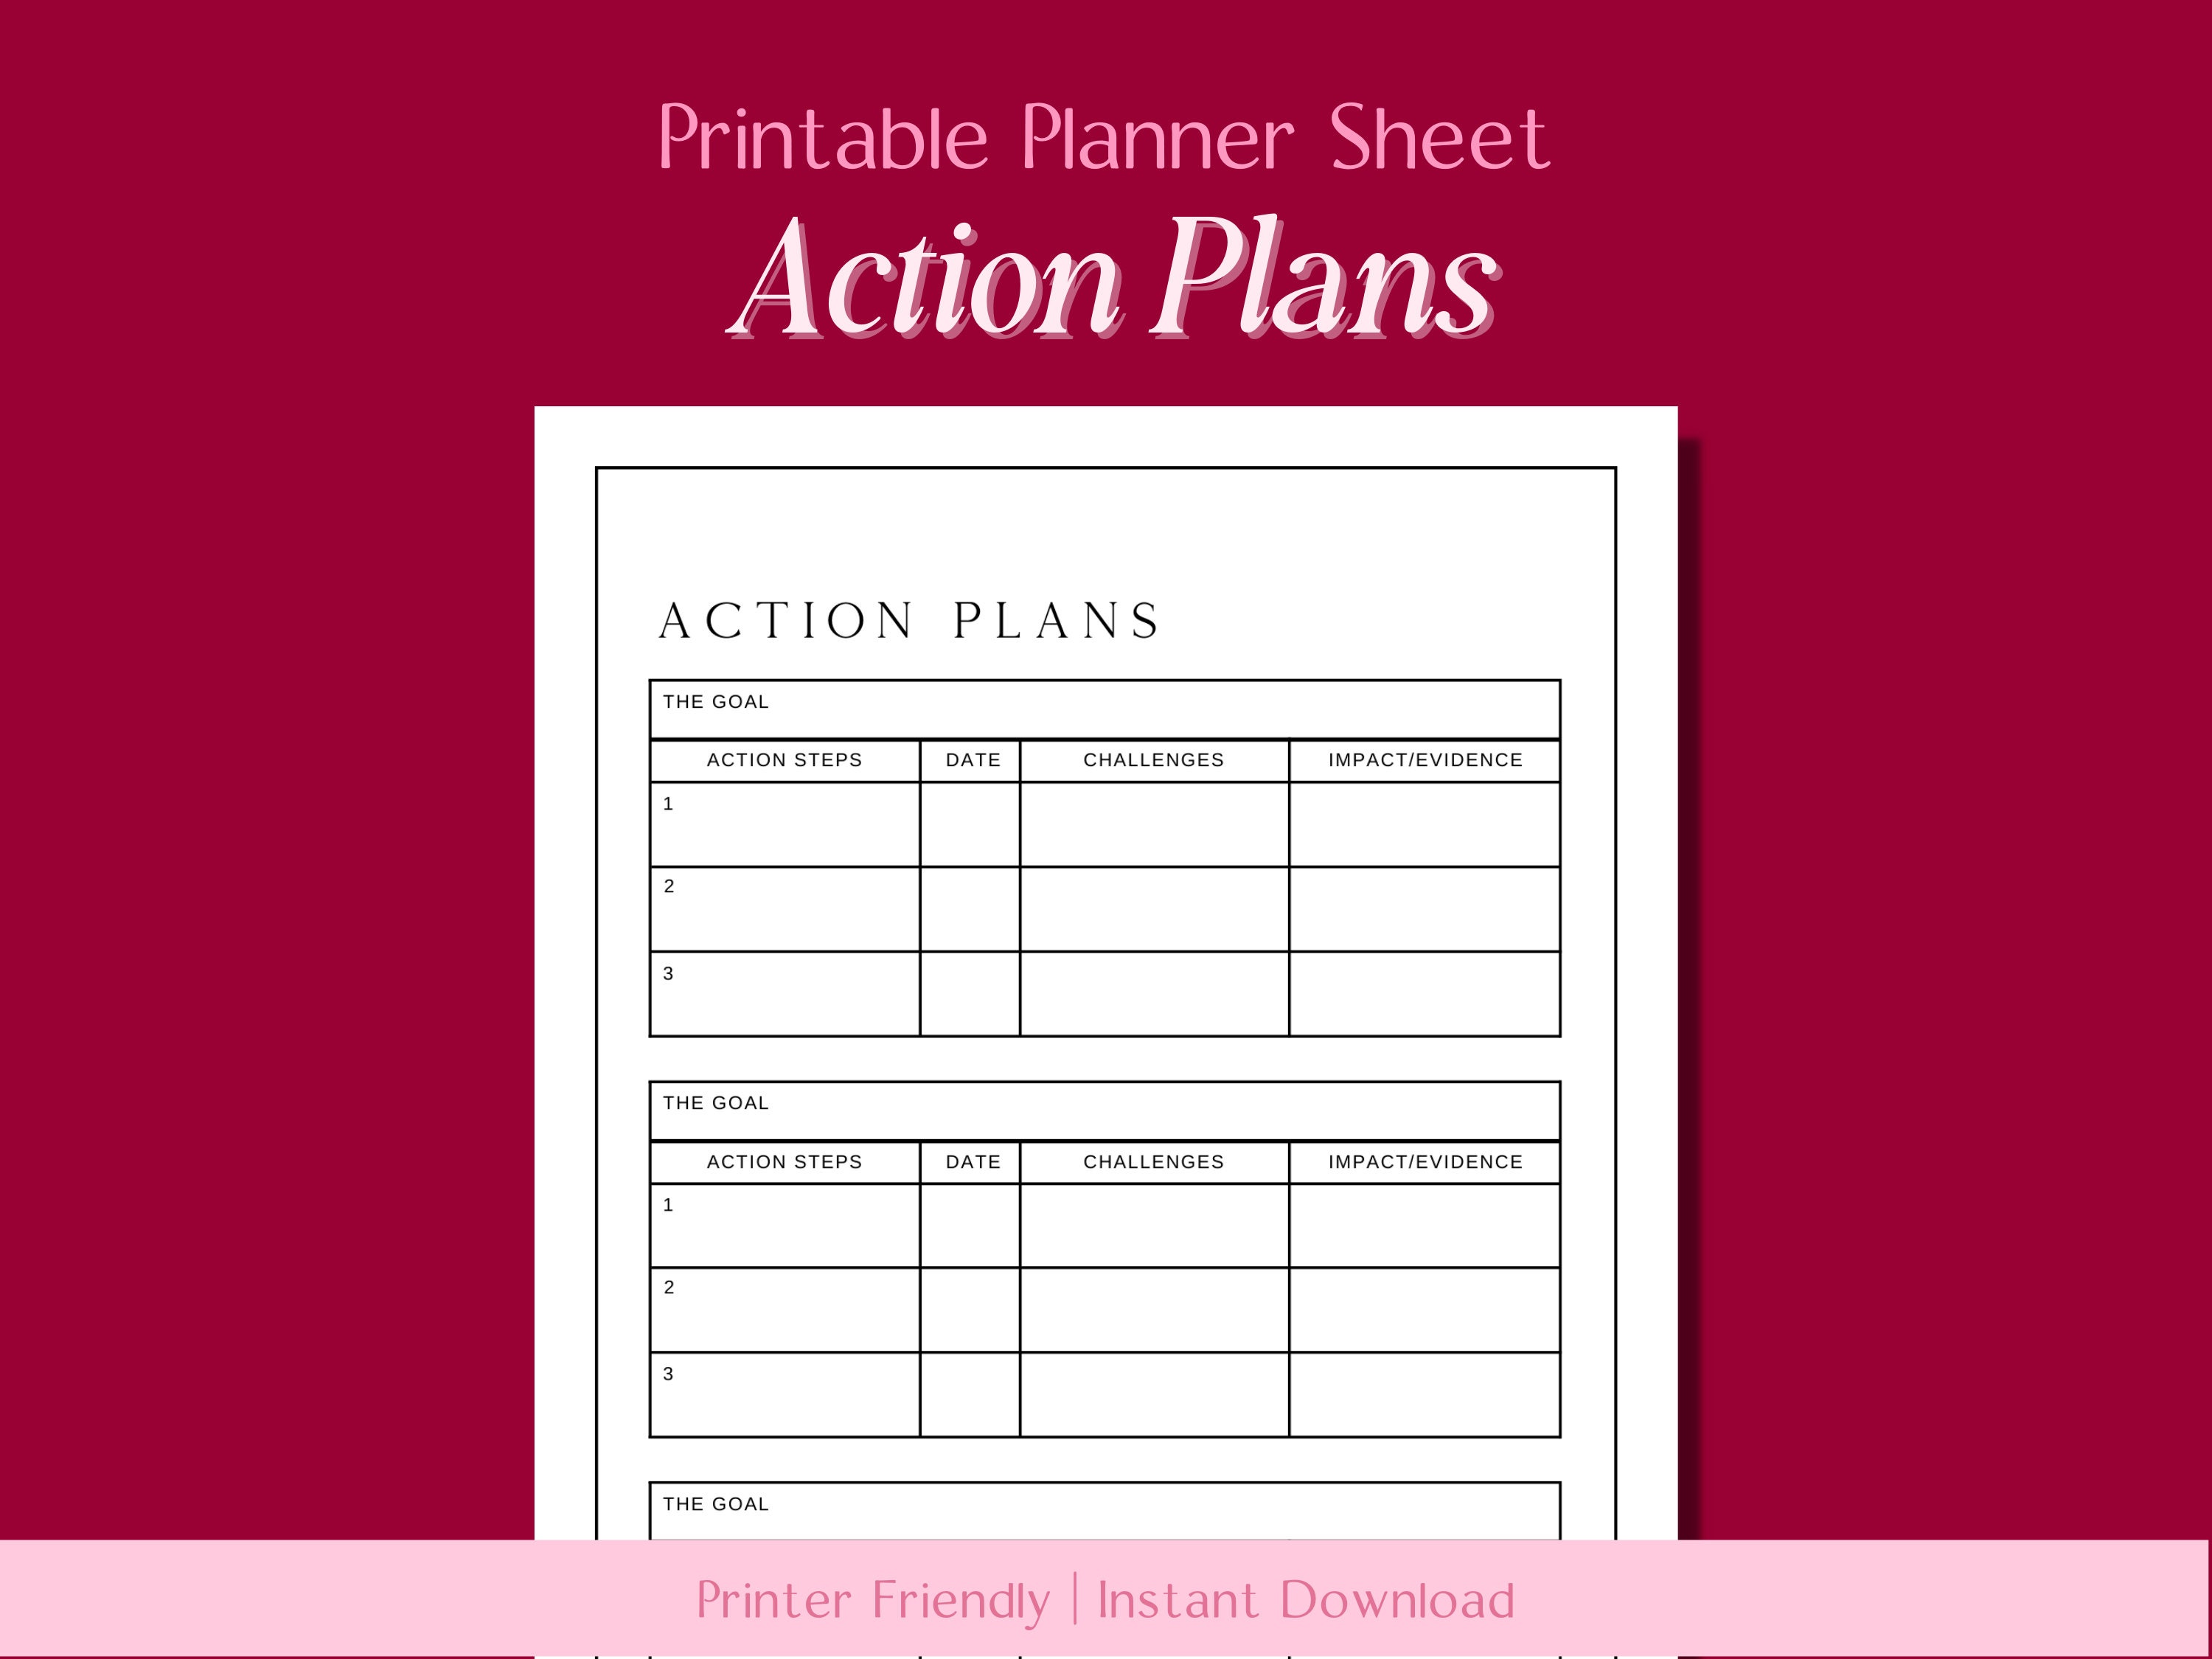 Action Planner Printable // Social Media for Business, Small Business ...